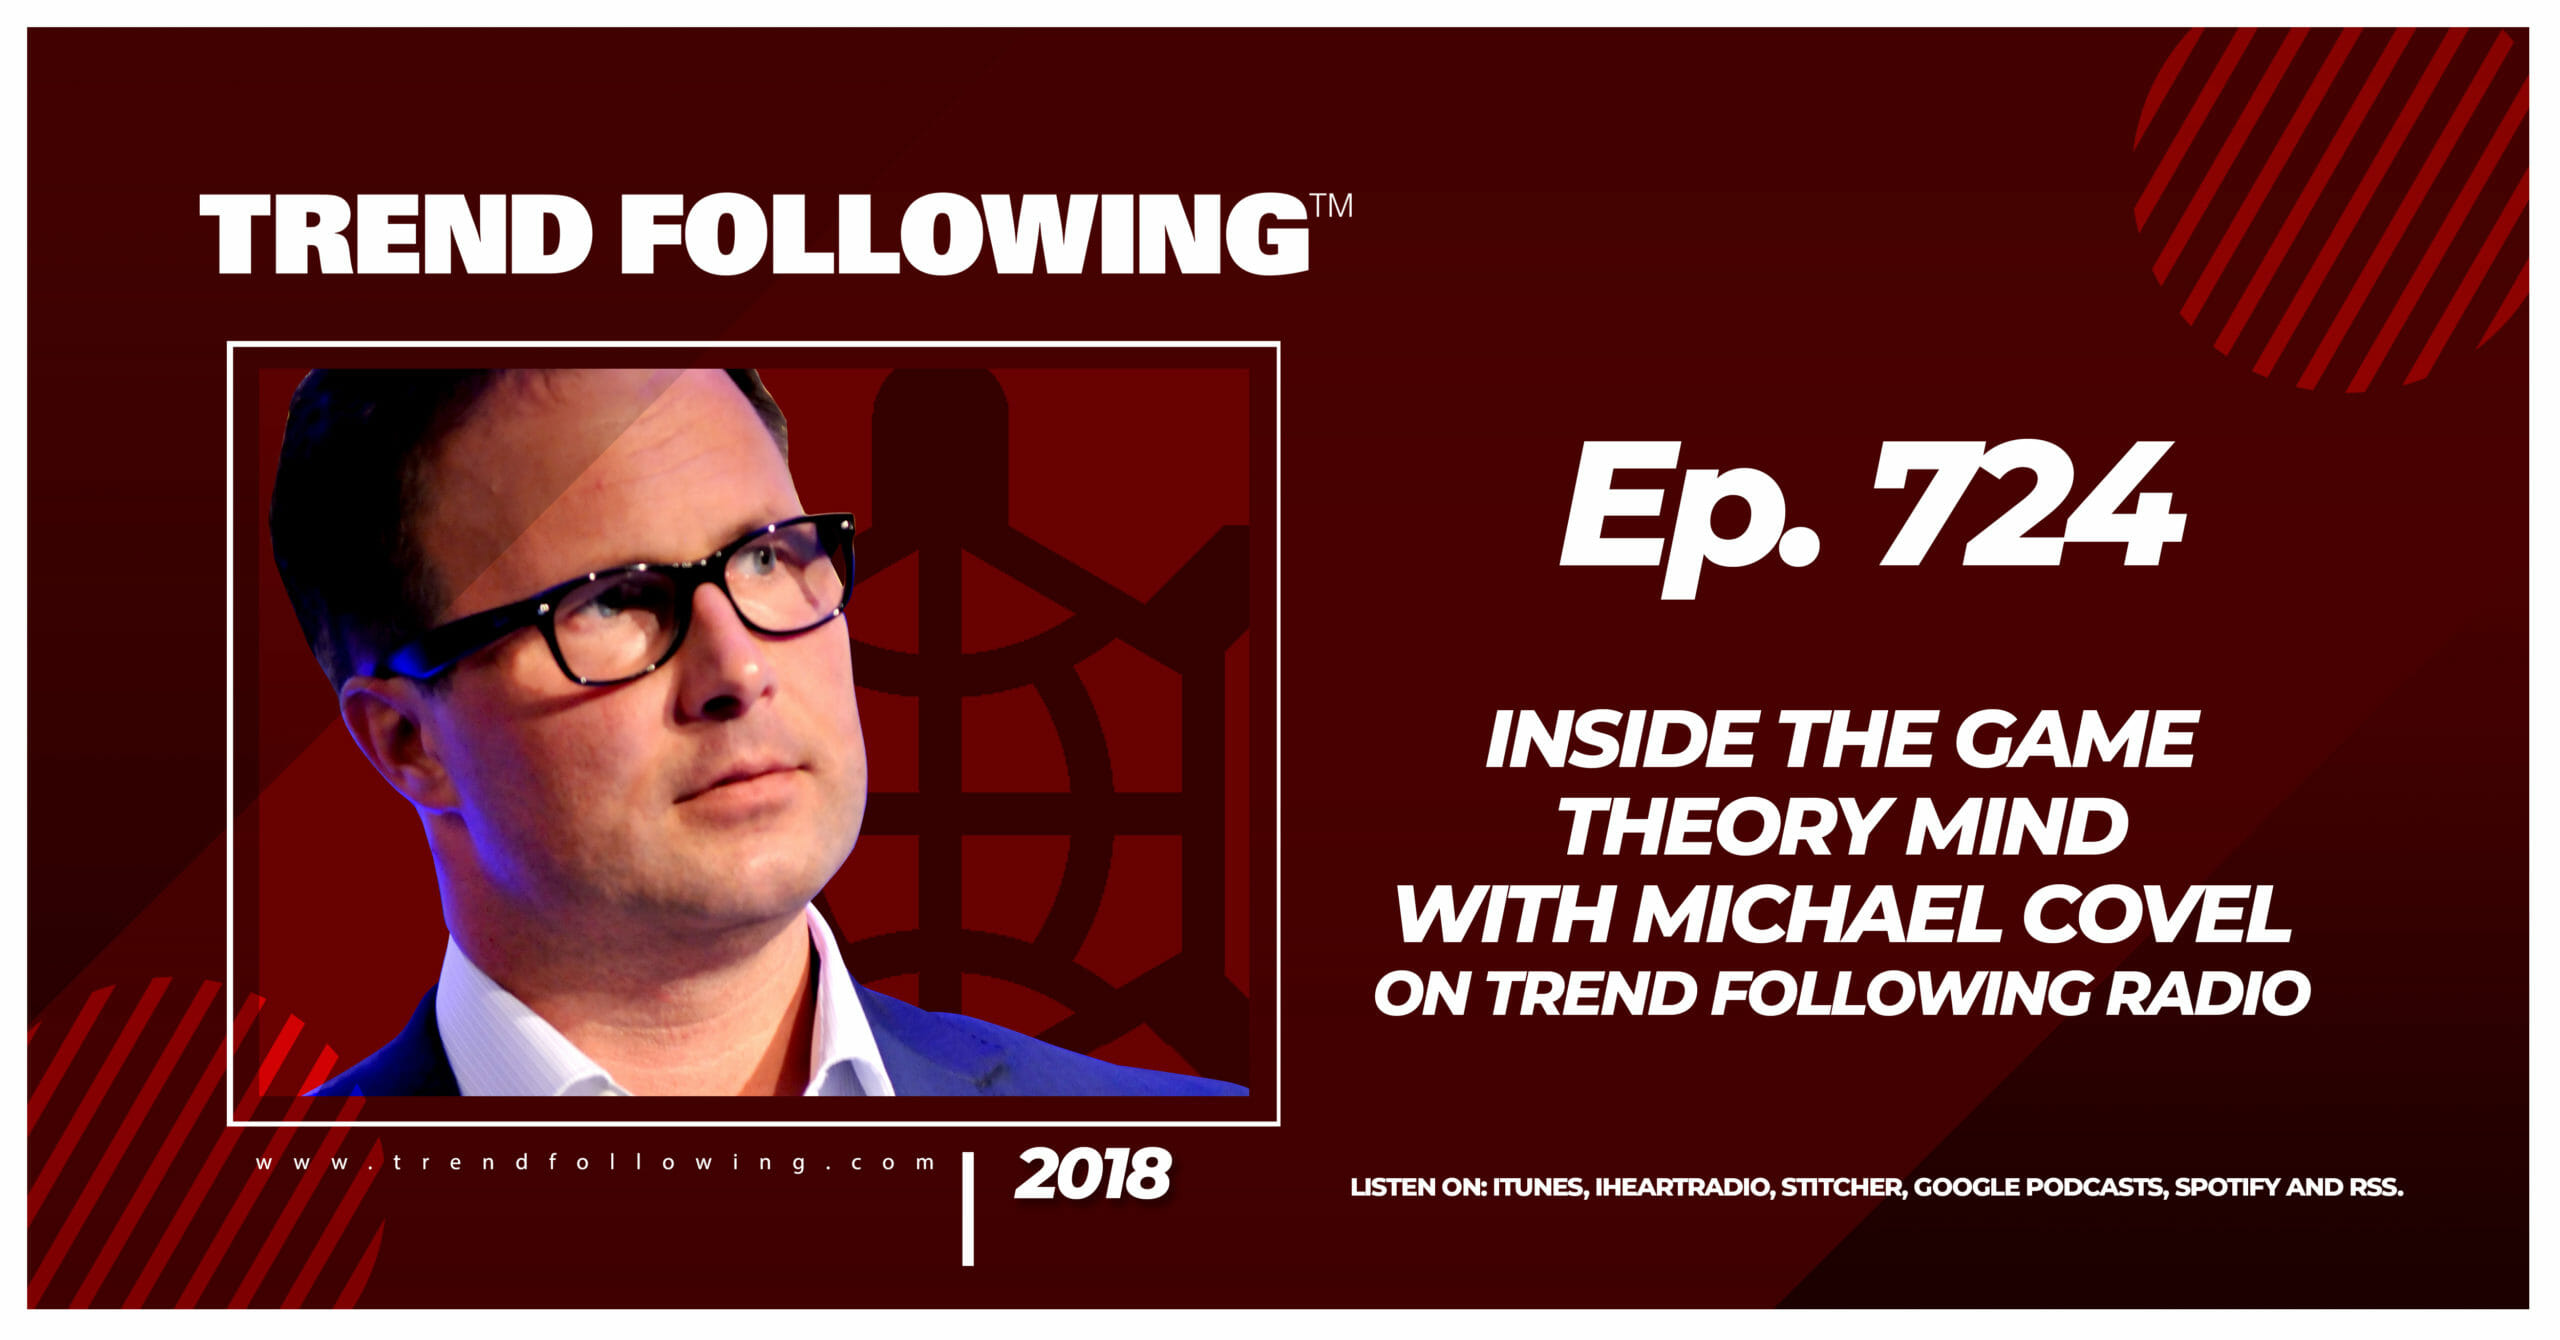 Inside The Game Theory Mind with Michael Covel